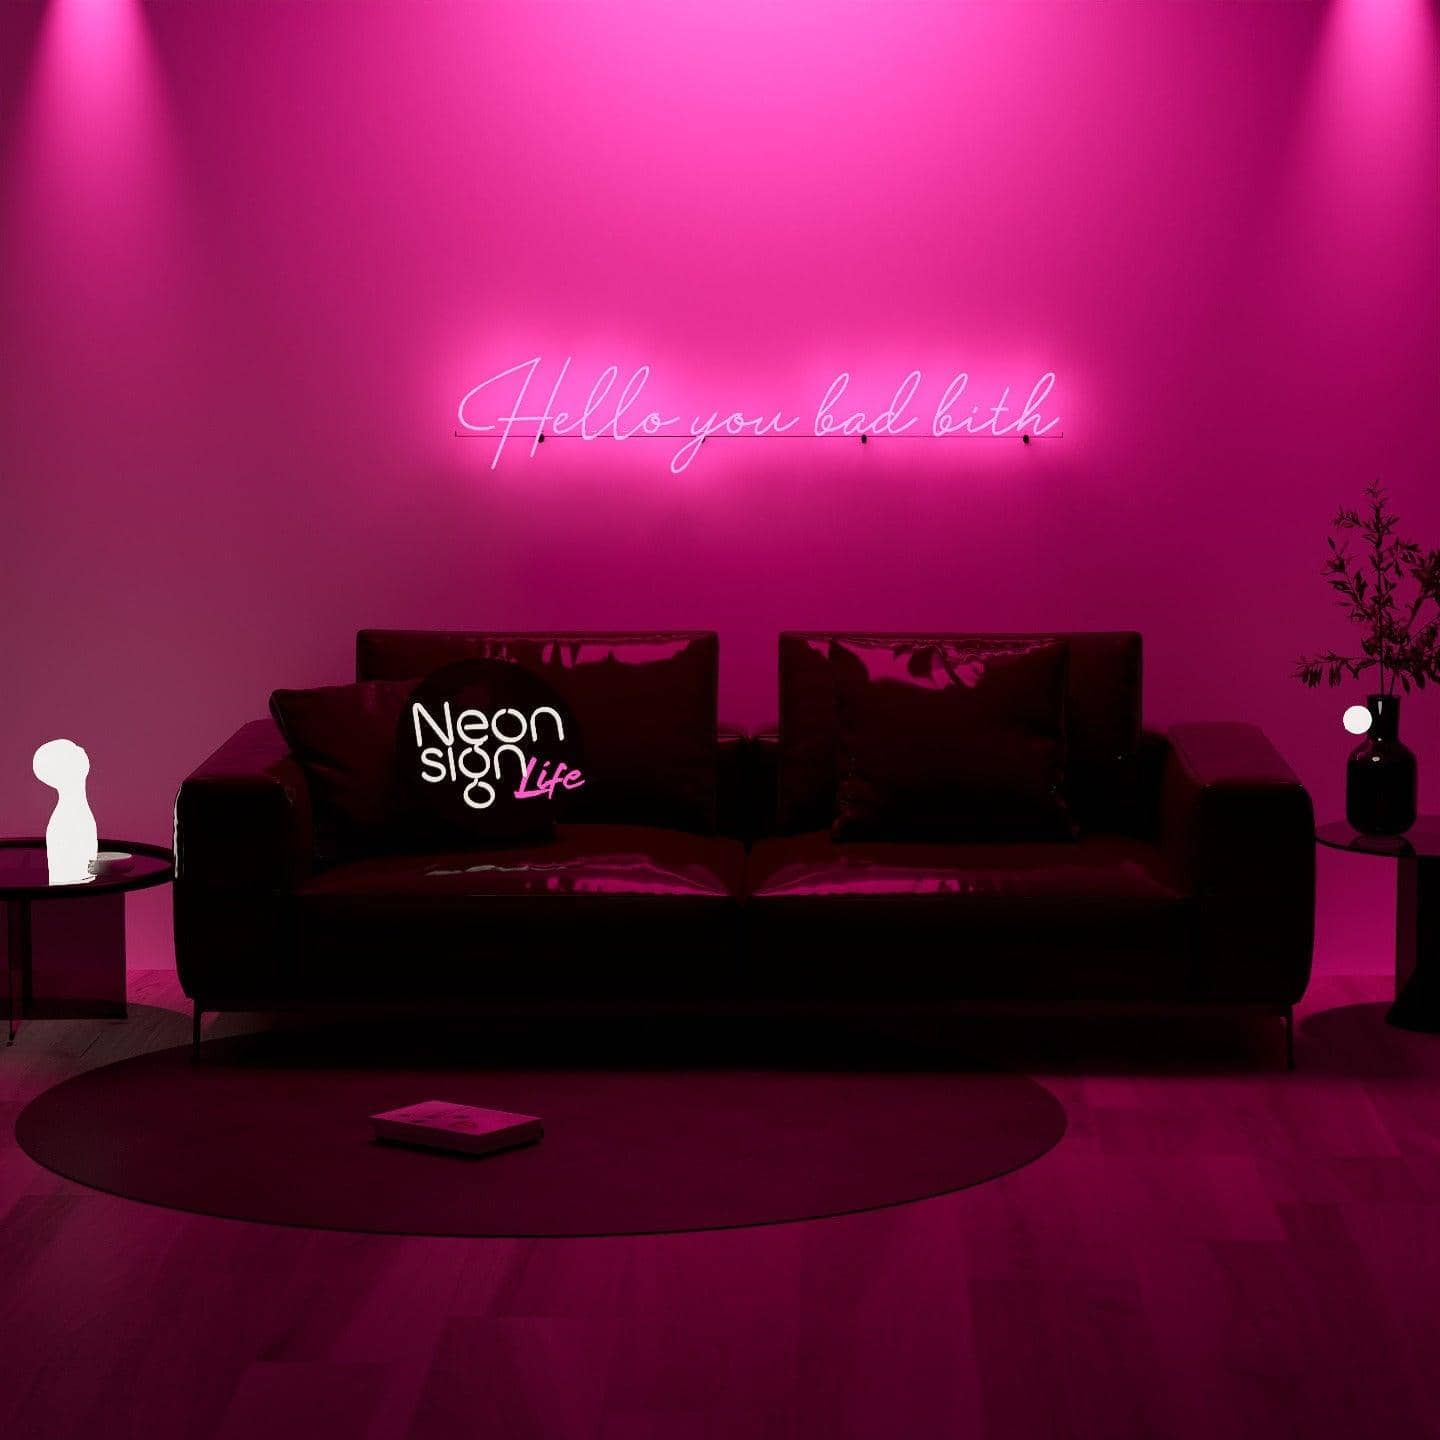 night-shot-of-lit-pink-neon-lights-hanging-on-the-wall-for-display-hello-you-bad-bith